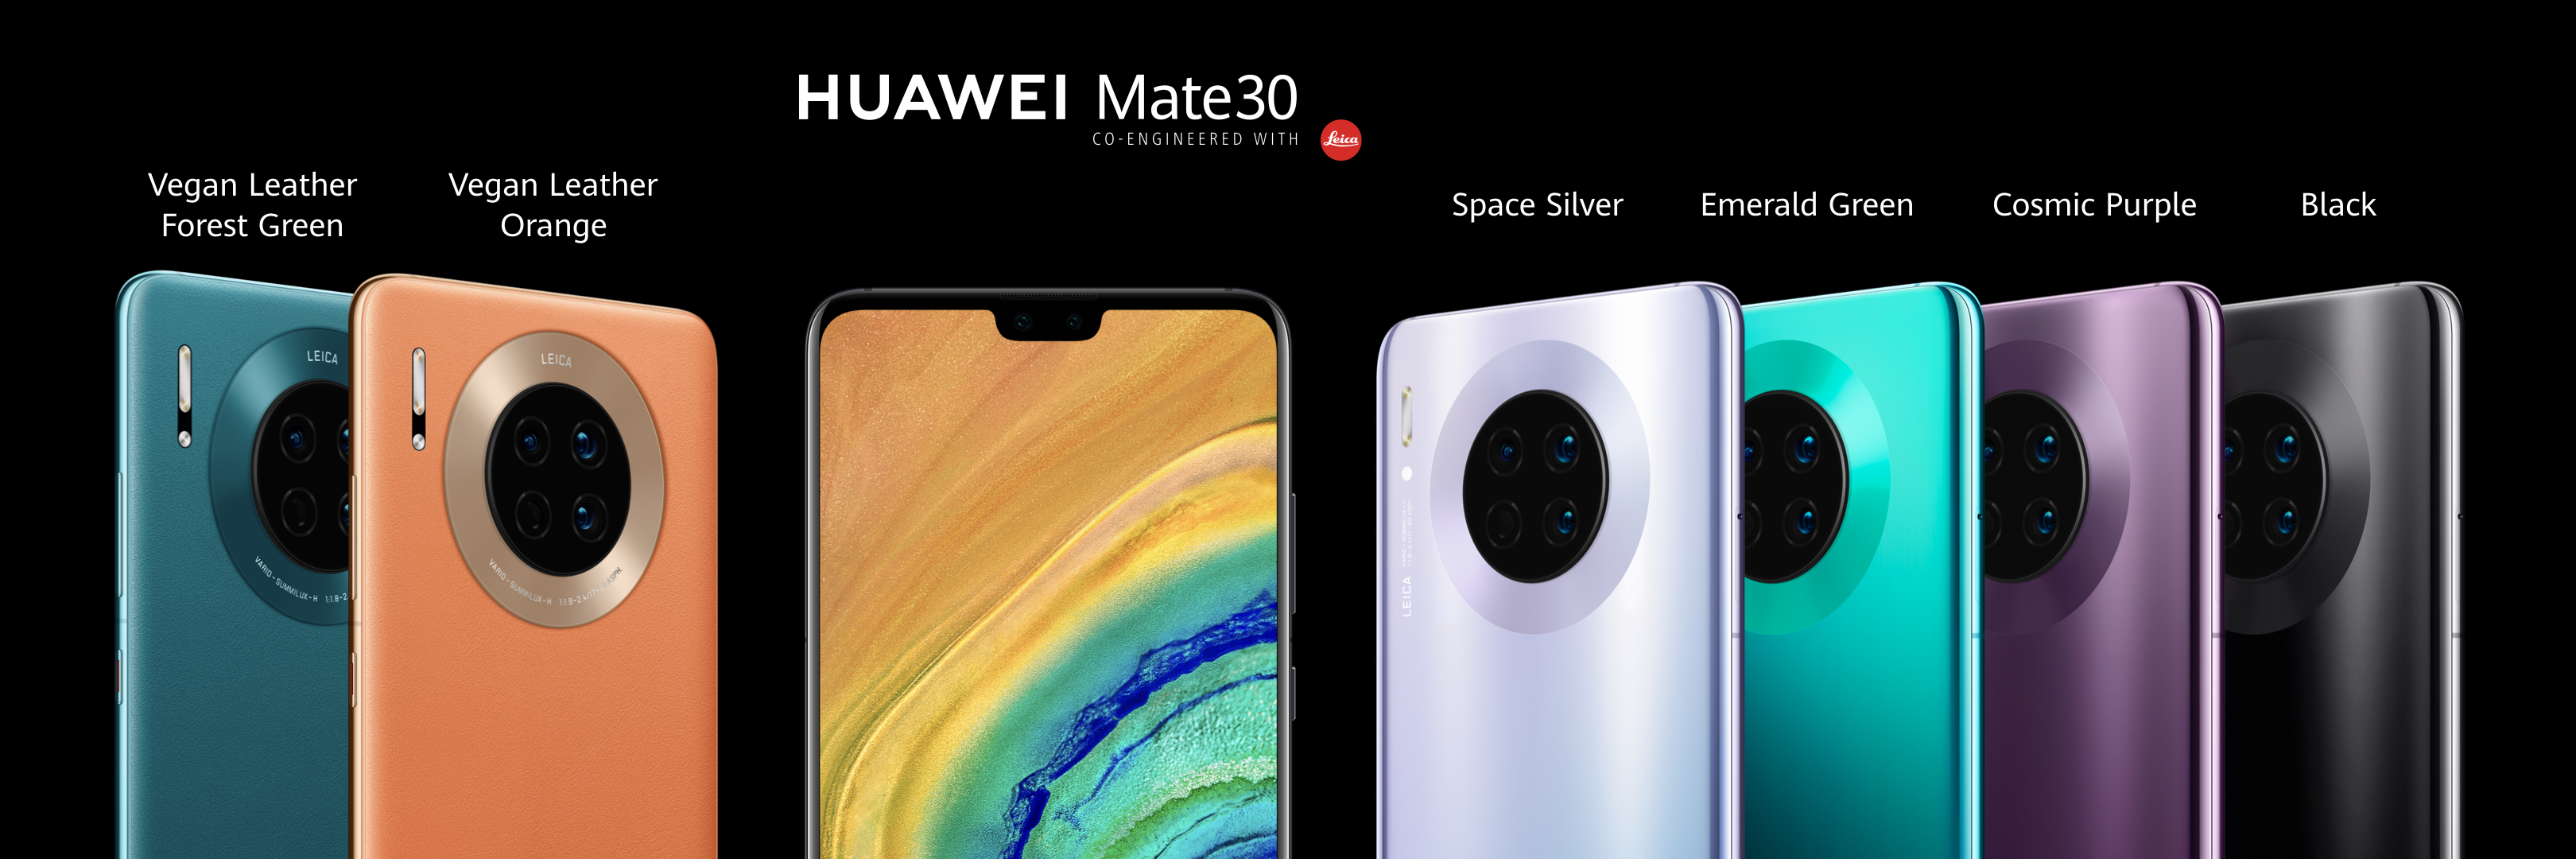 Huawei’s new Mate 30 series redefines smartphone videography, AI sensing, and interactive touch - Alvinology